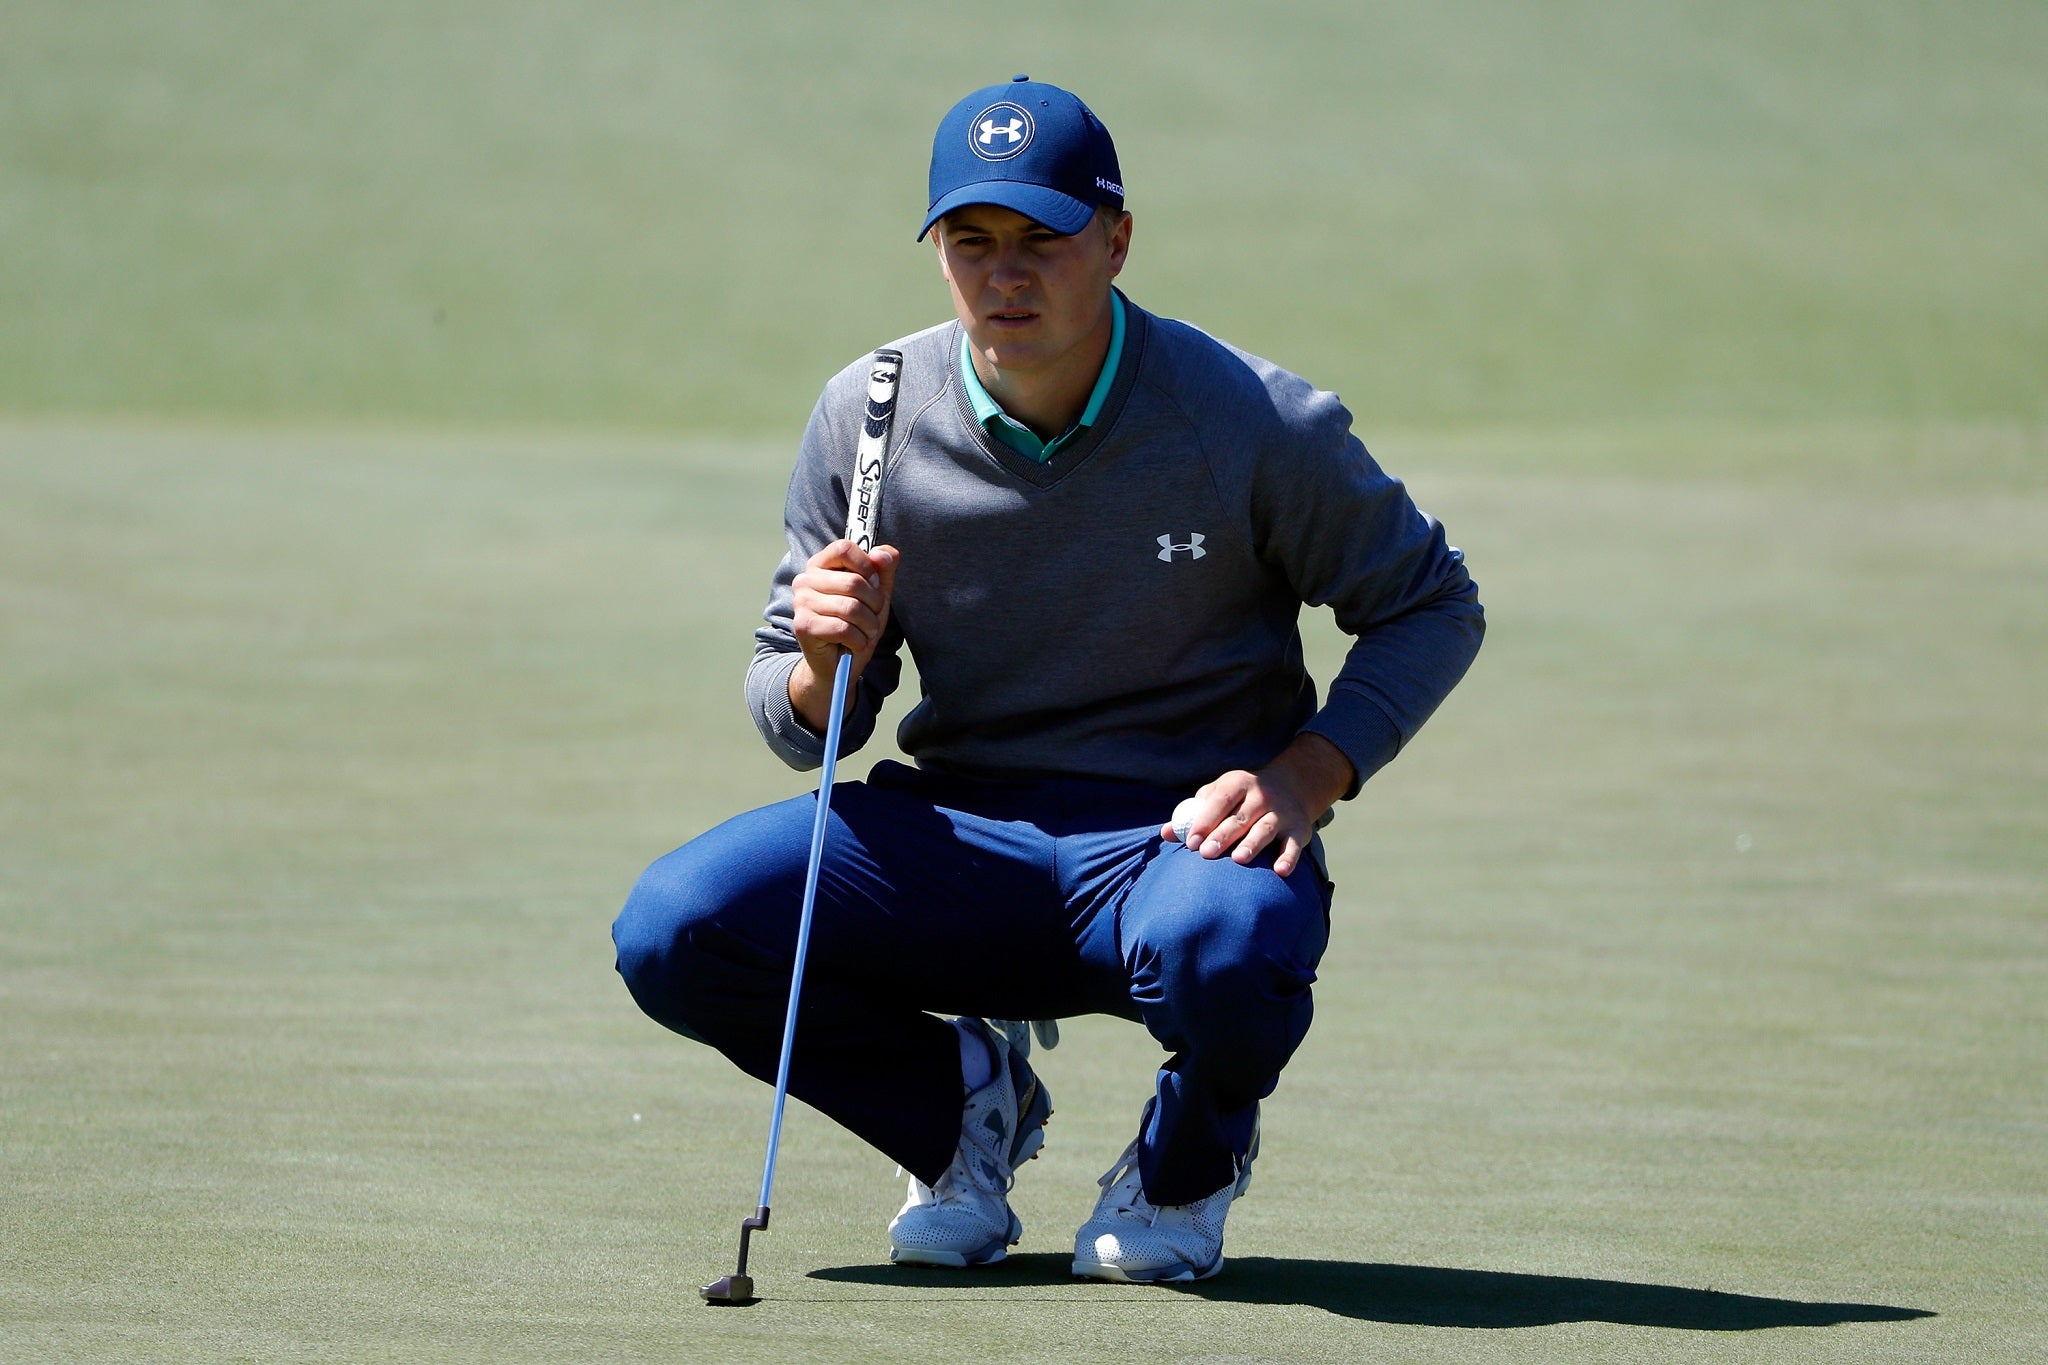 Jordan Spieth lines up a putt on the first hole